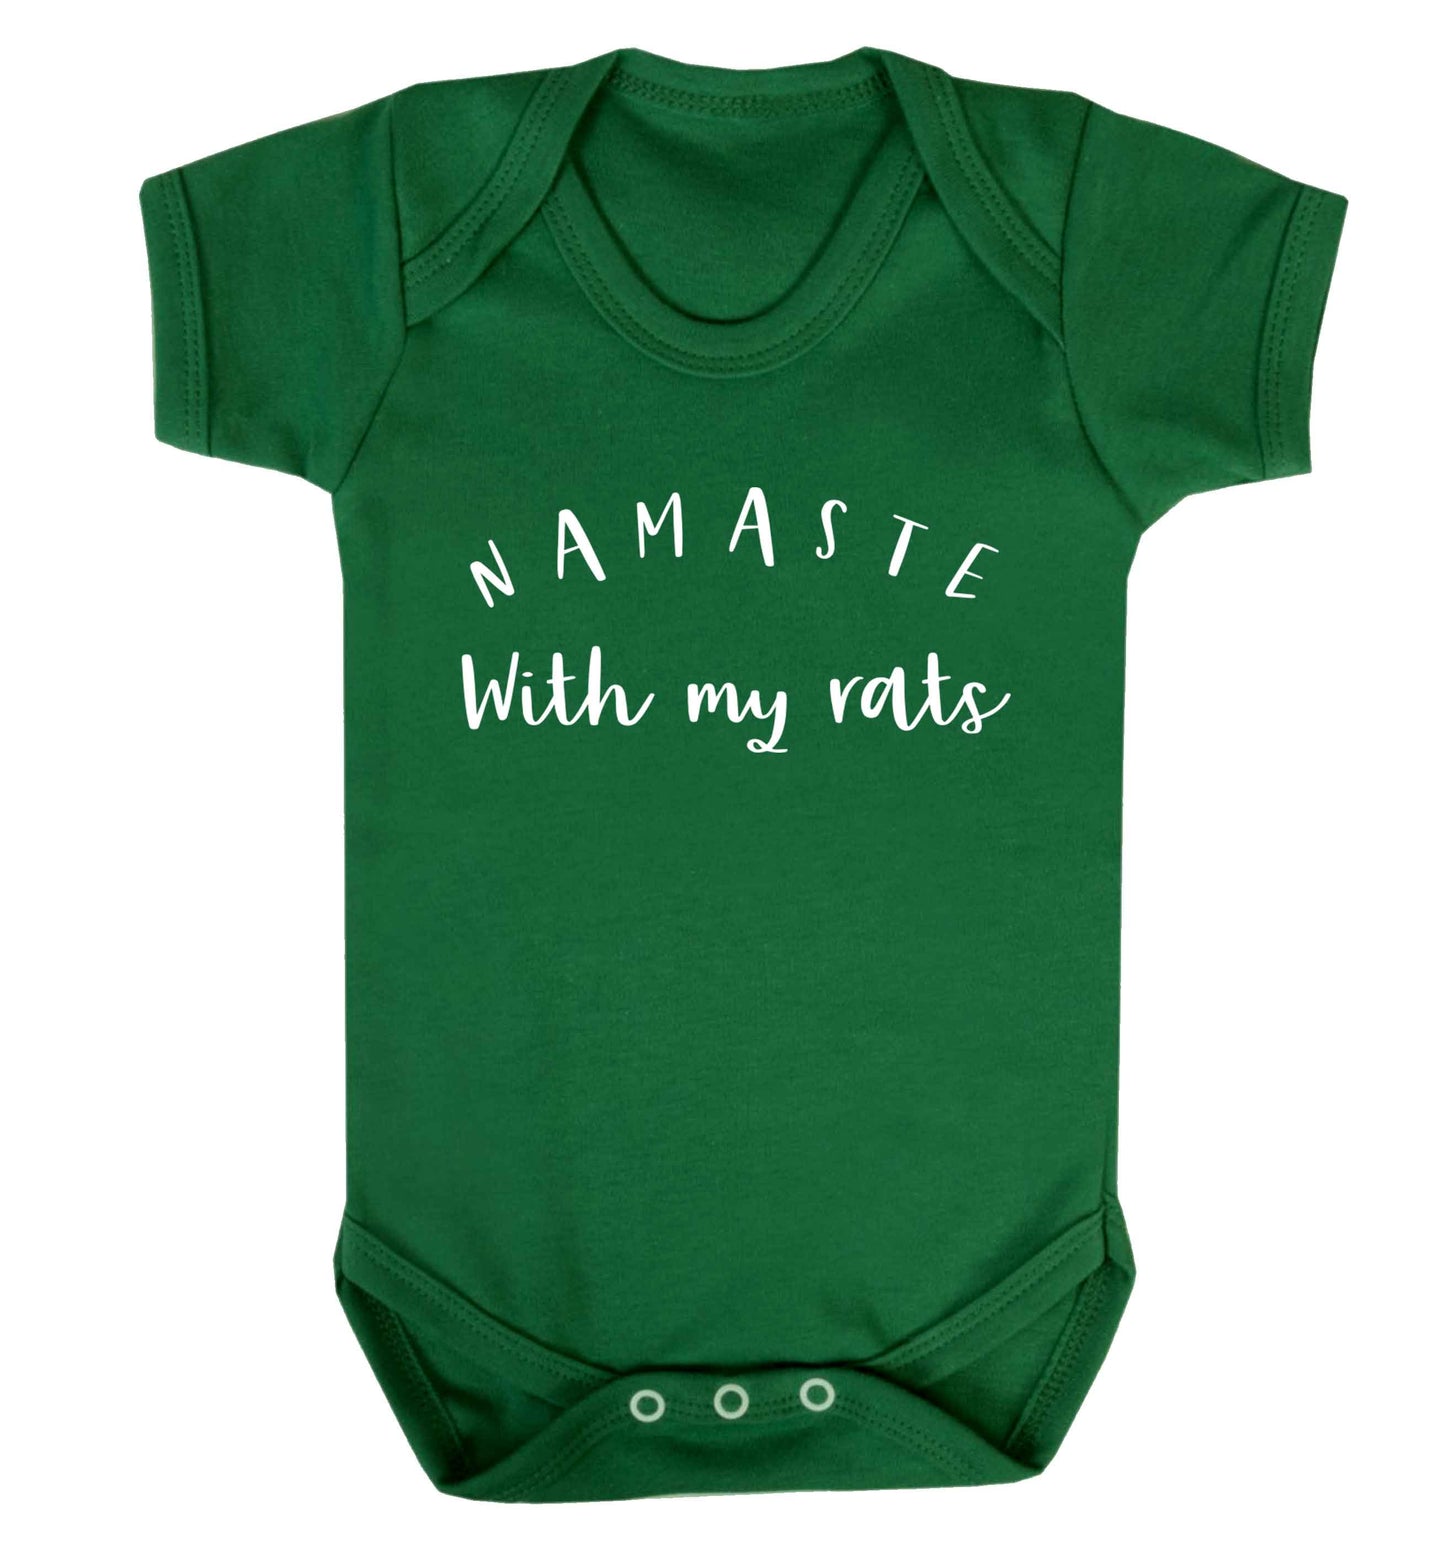 Namaste with my rats Baby Vest green 18-24 months